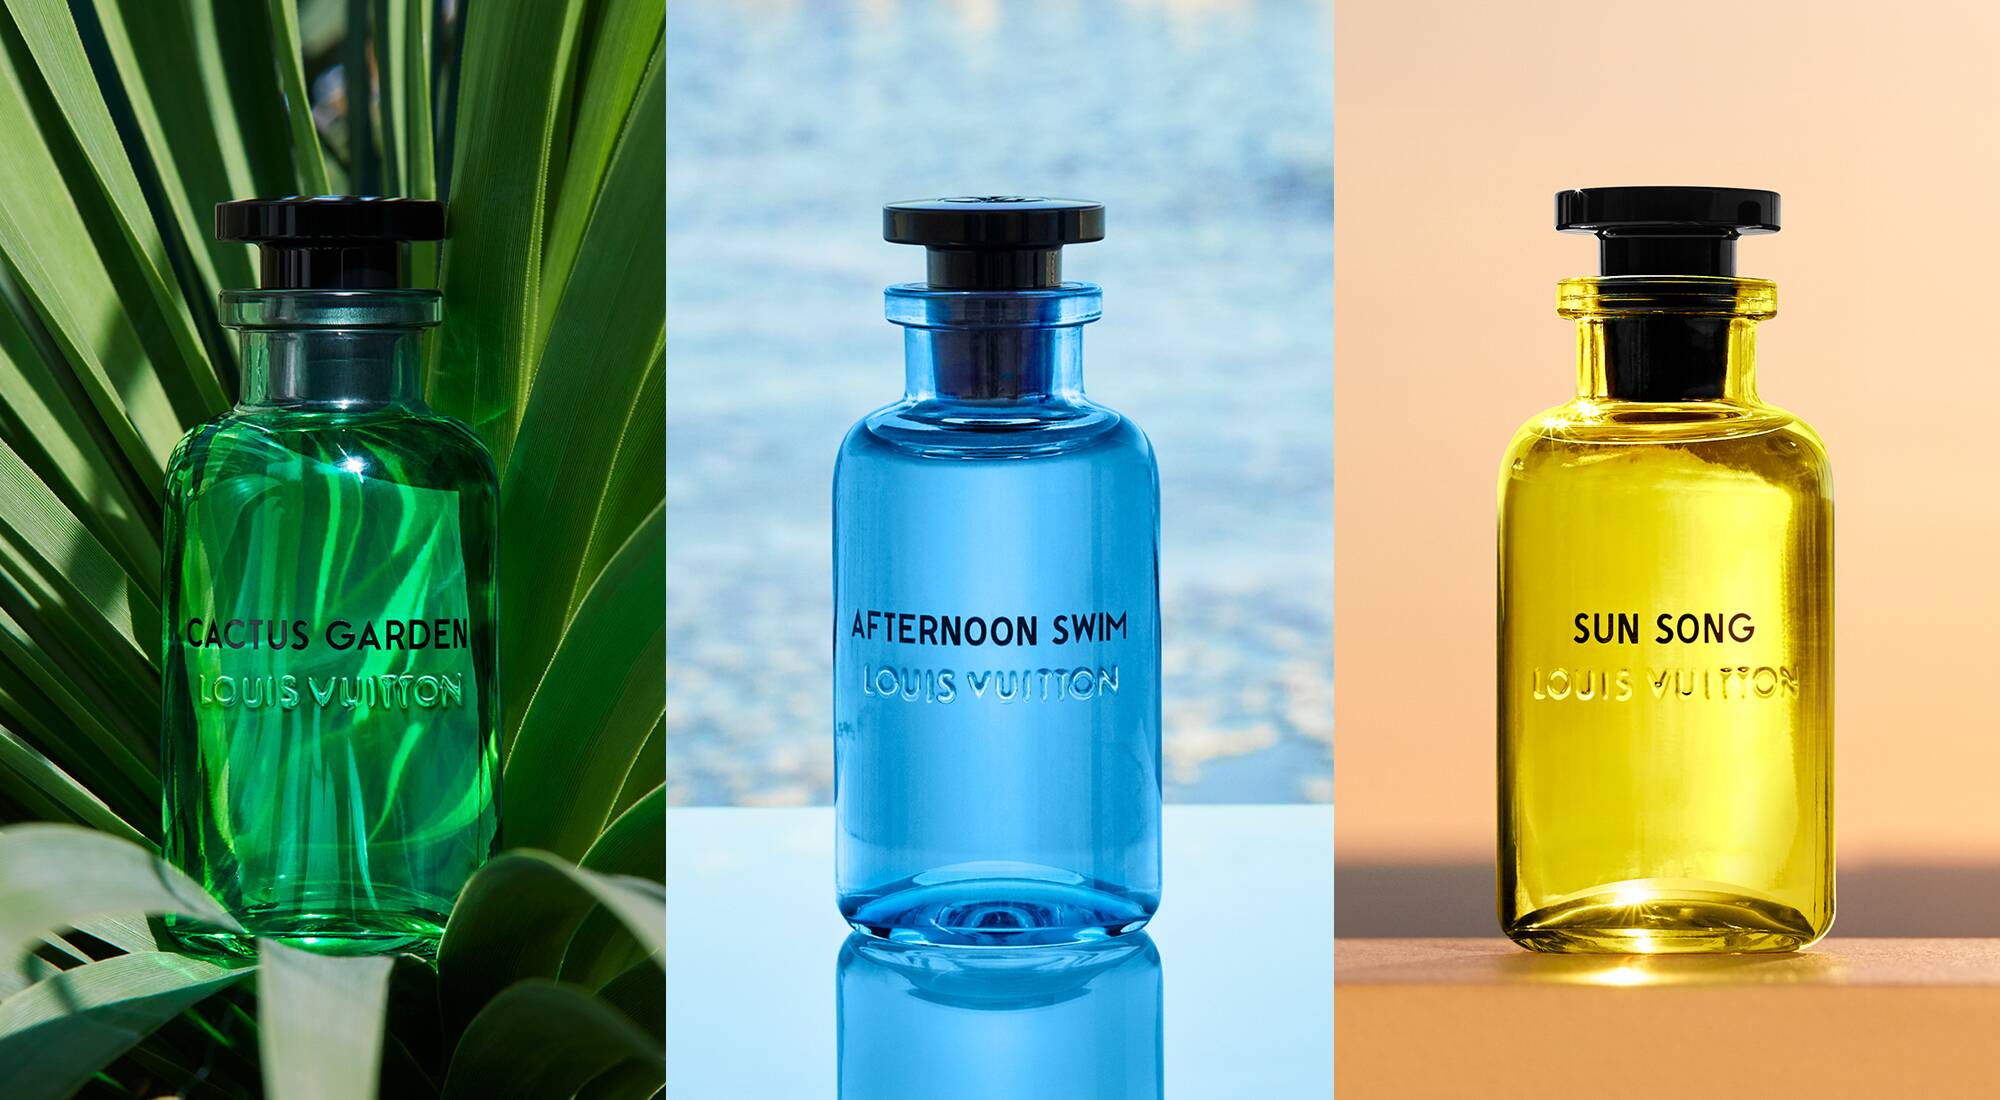 Sun Song, Cactus Garden and Afternoon Swim, three new fragrance creations  from Louis Vuitton inspired by California summer - LVMH